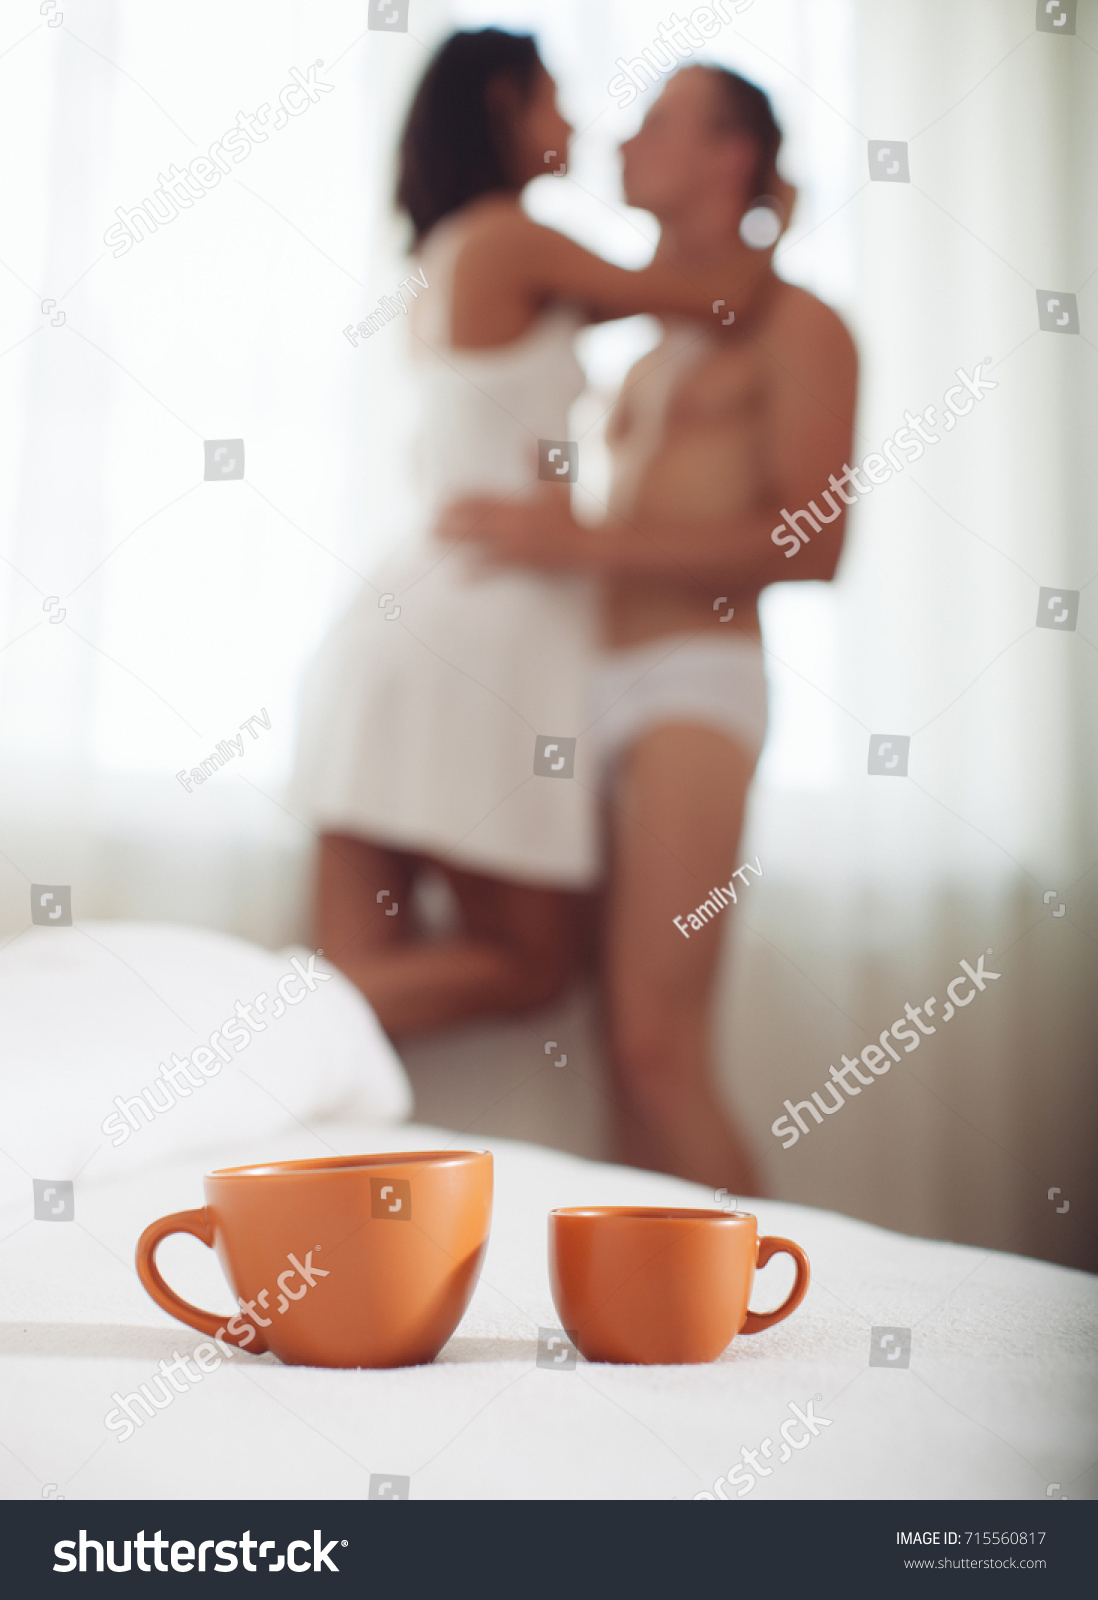 amy hensel recommends sensual good morning images pic